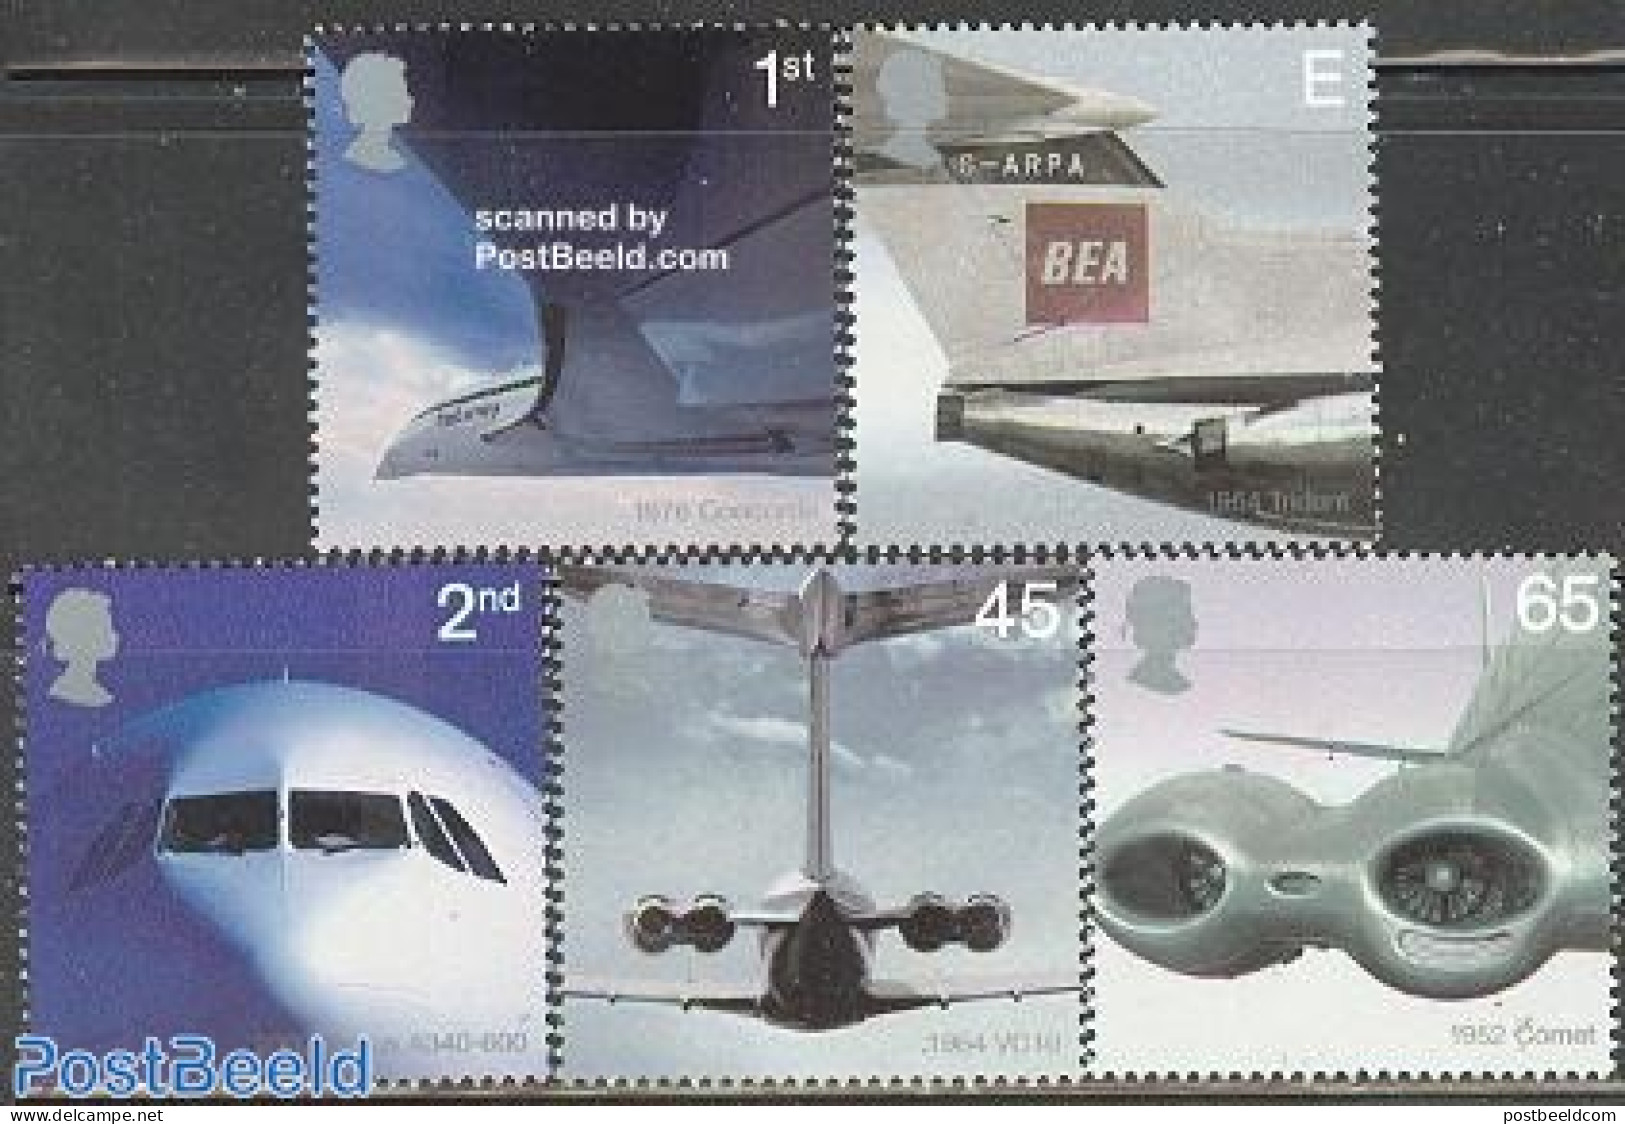 Great Britain 2002 Airliners 5v, Mint NH, Transport - Concorde - Aircraft & Aviation - Nuevos